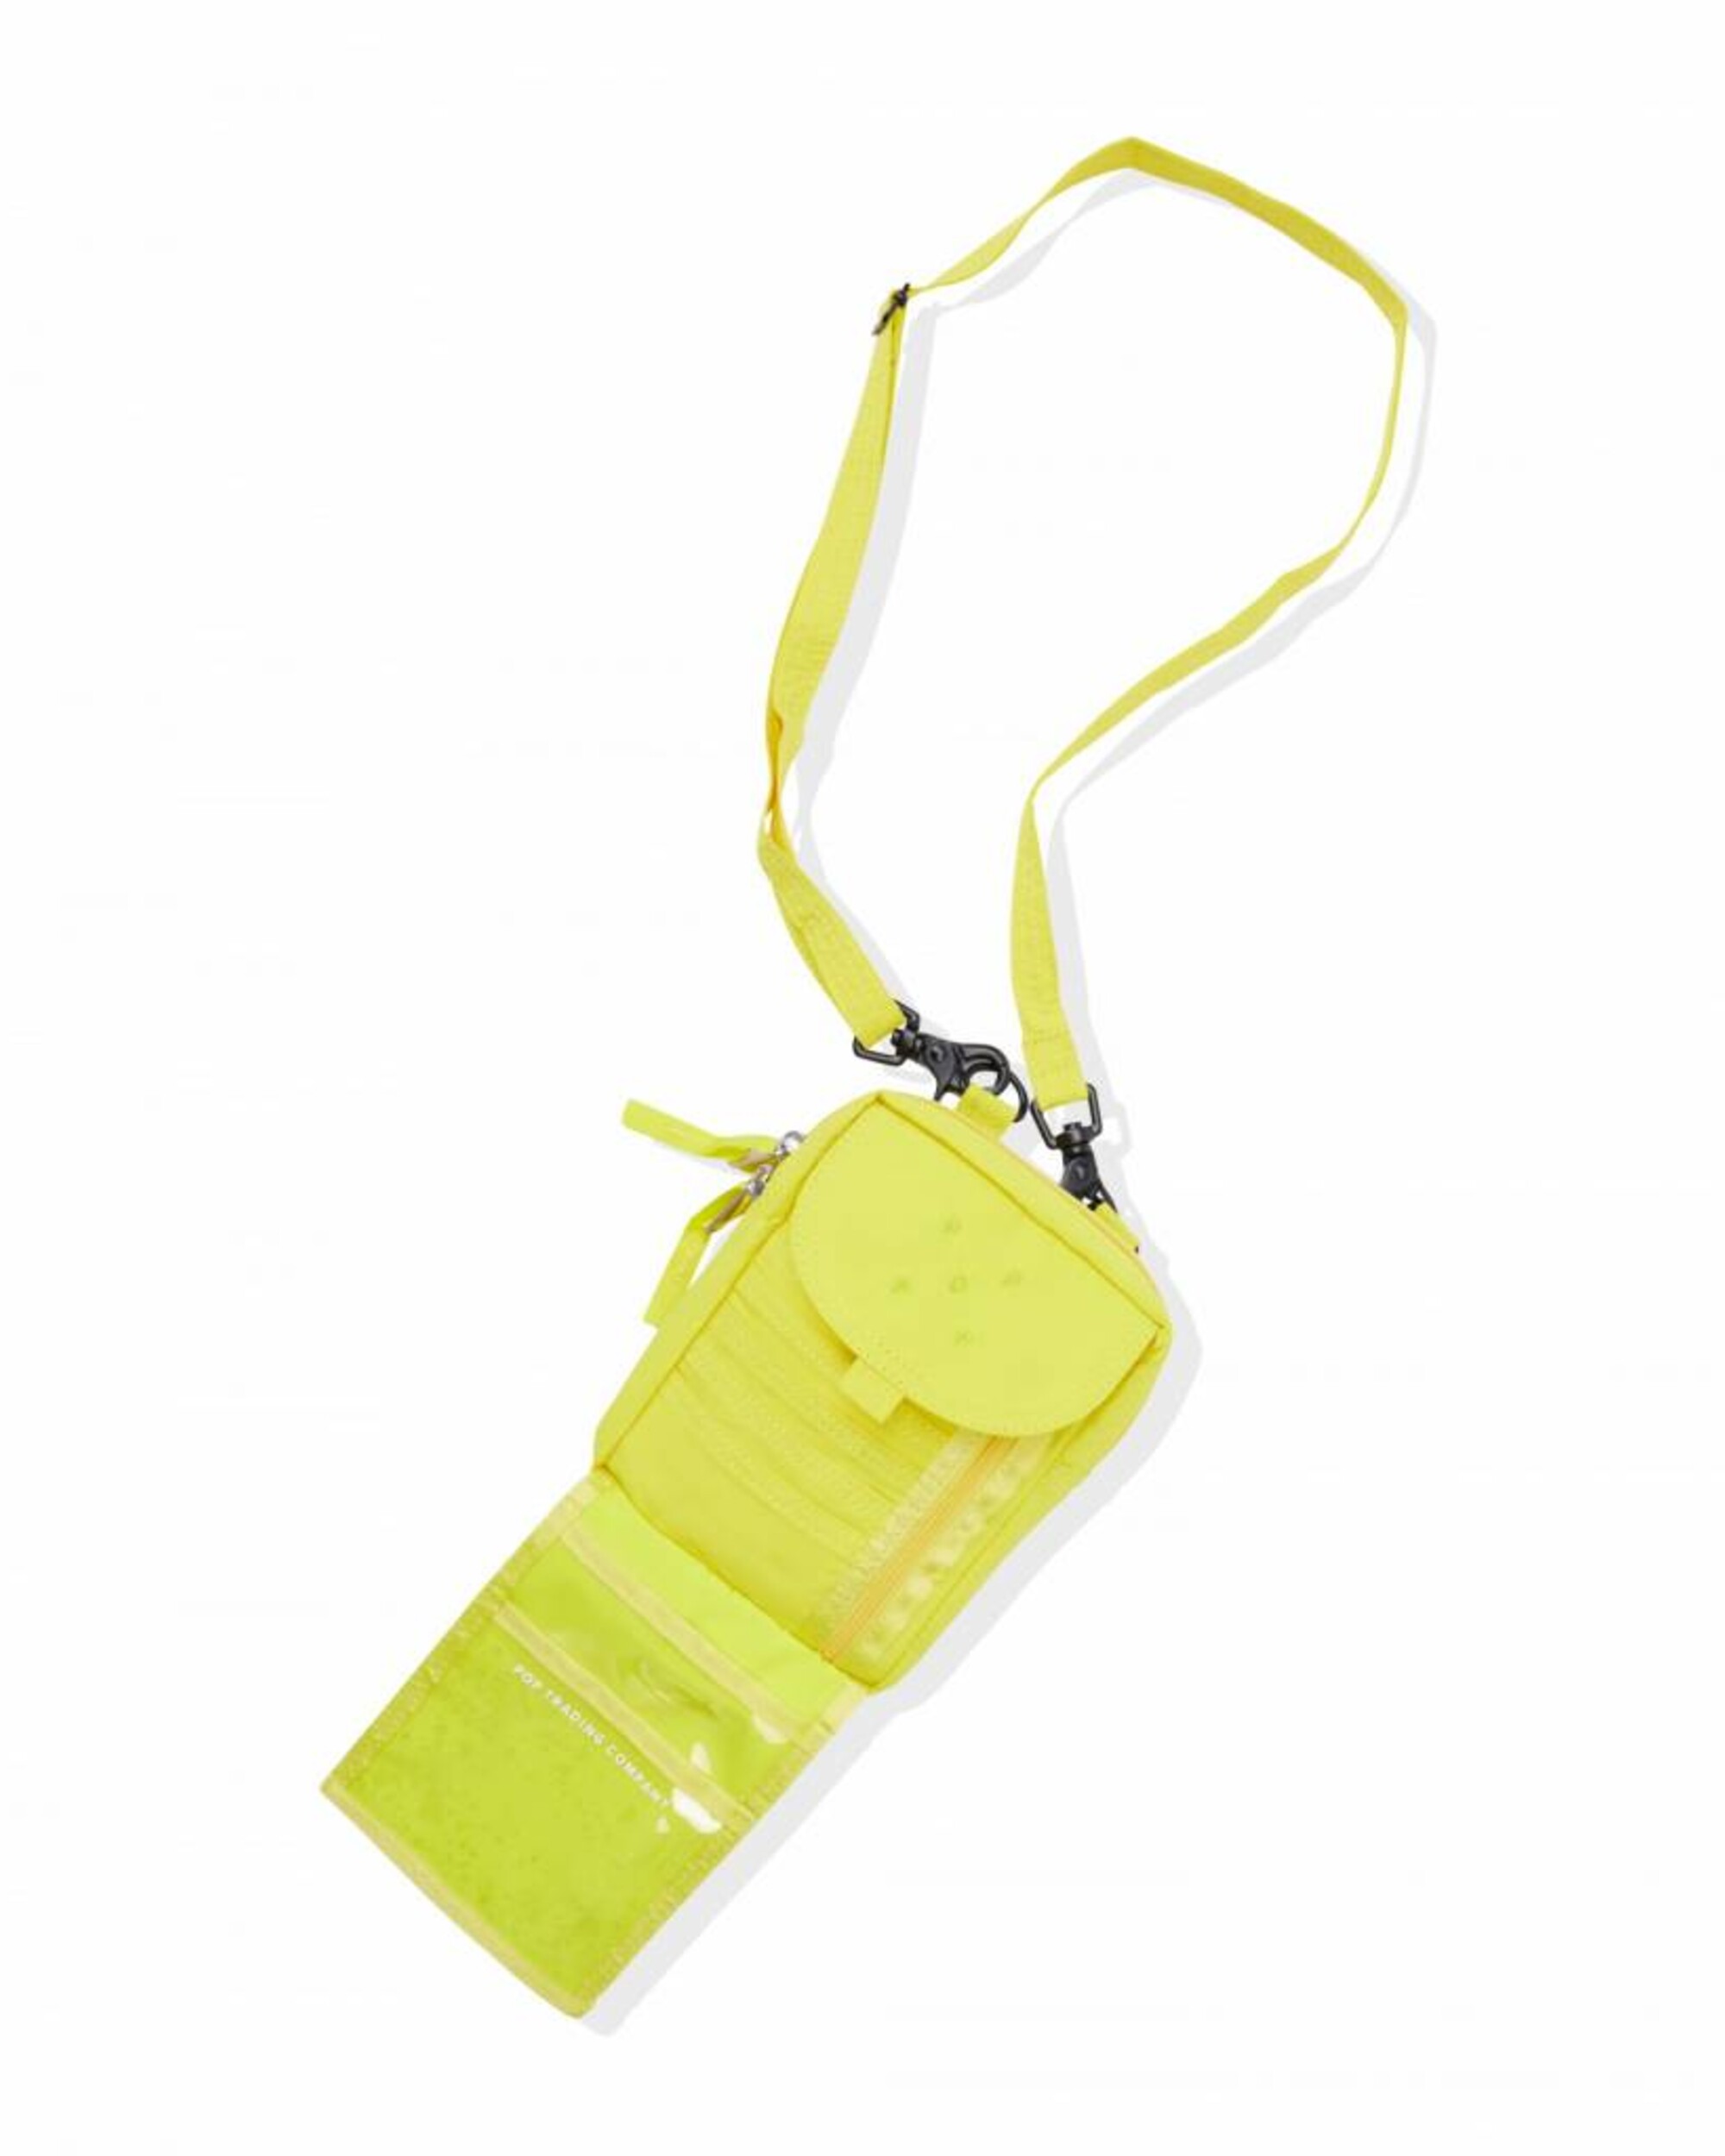 Pop Trading Co Passport Pouch Electric Yellow